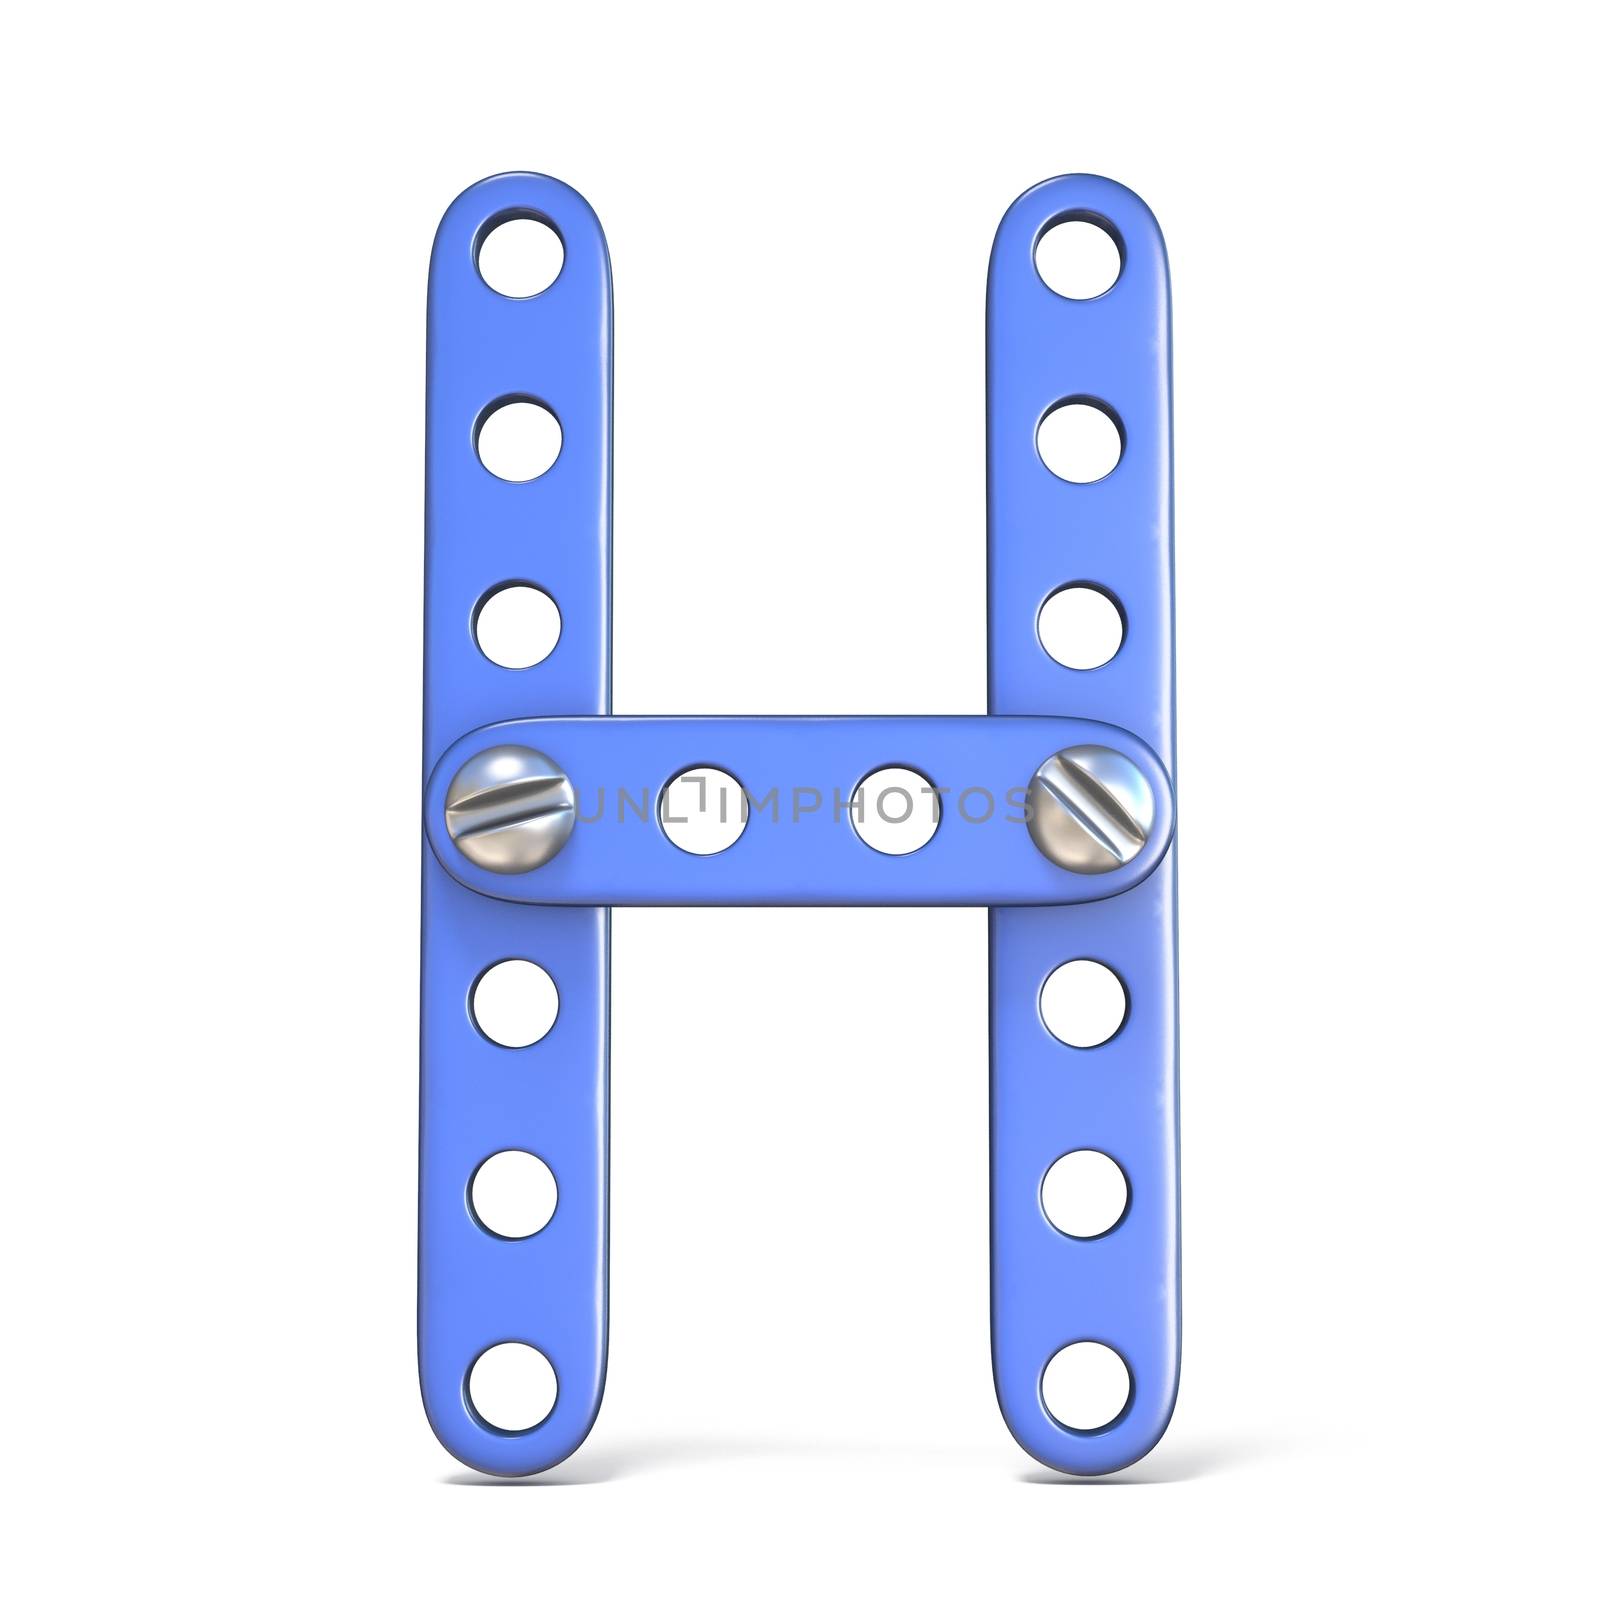 Alphabet made of blue metal constructor toy Letter H 3D by djmilic